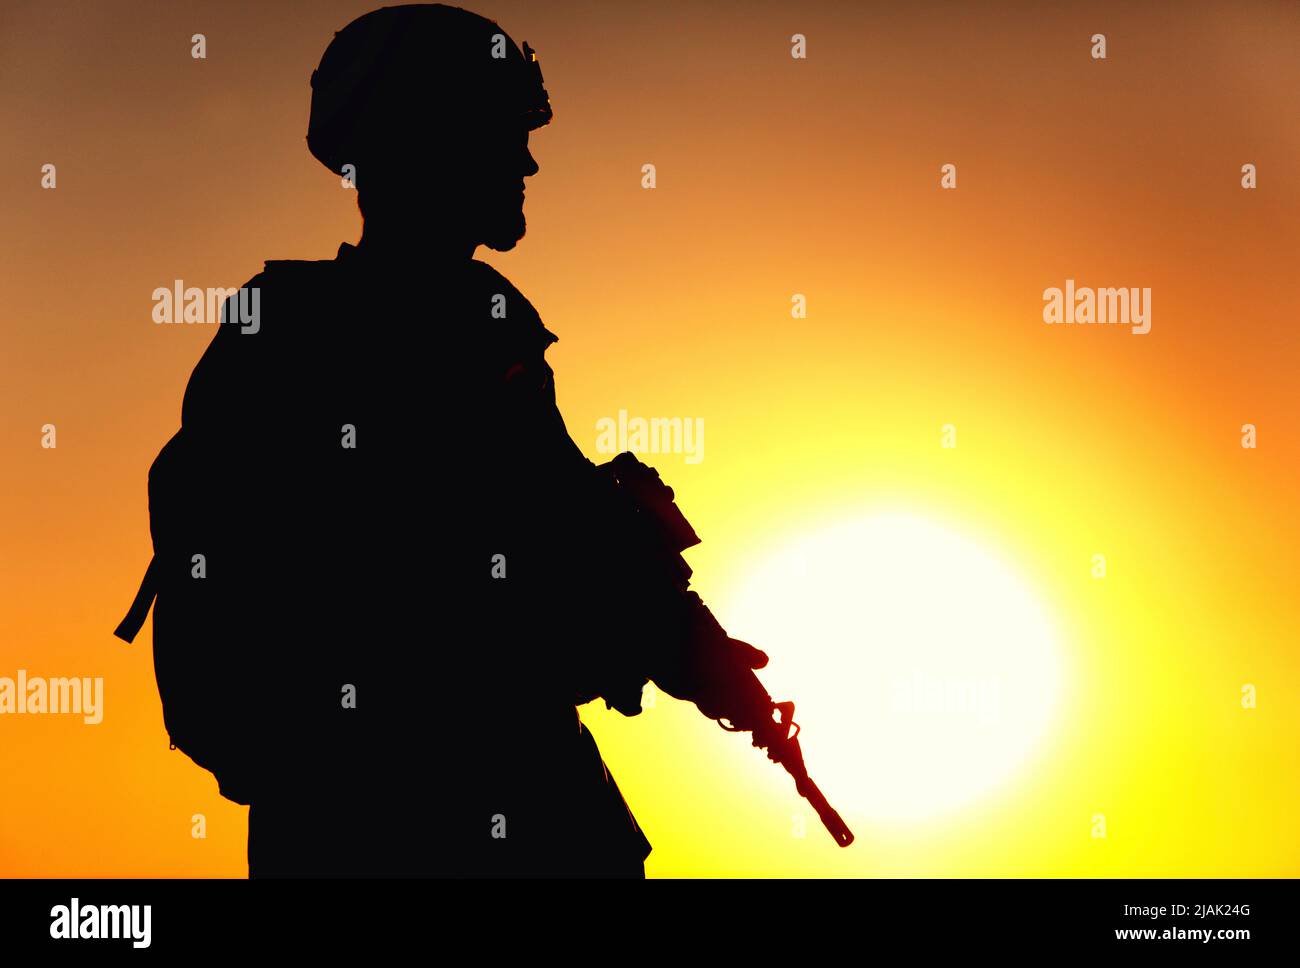 Silhouette of rifleman carrying tactical backpack and service rifle, with background of sunset sky. Stock Photo